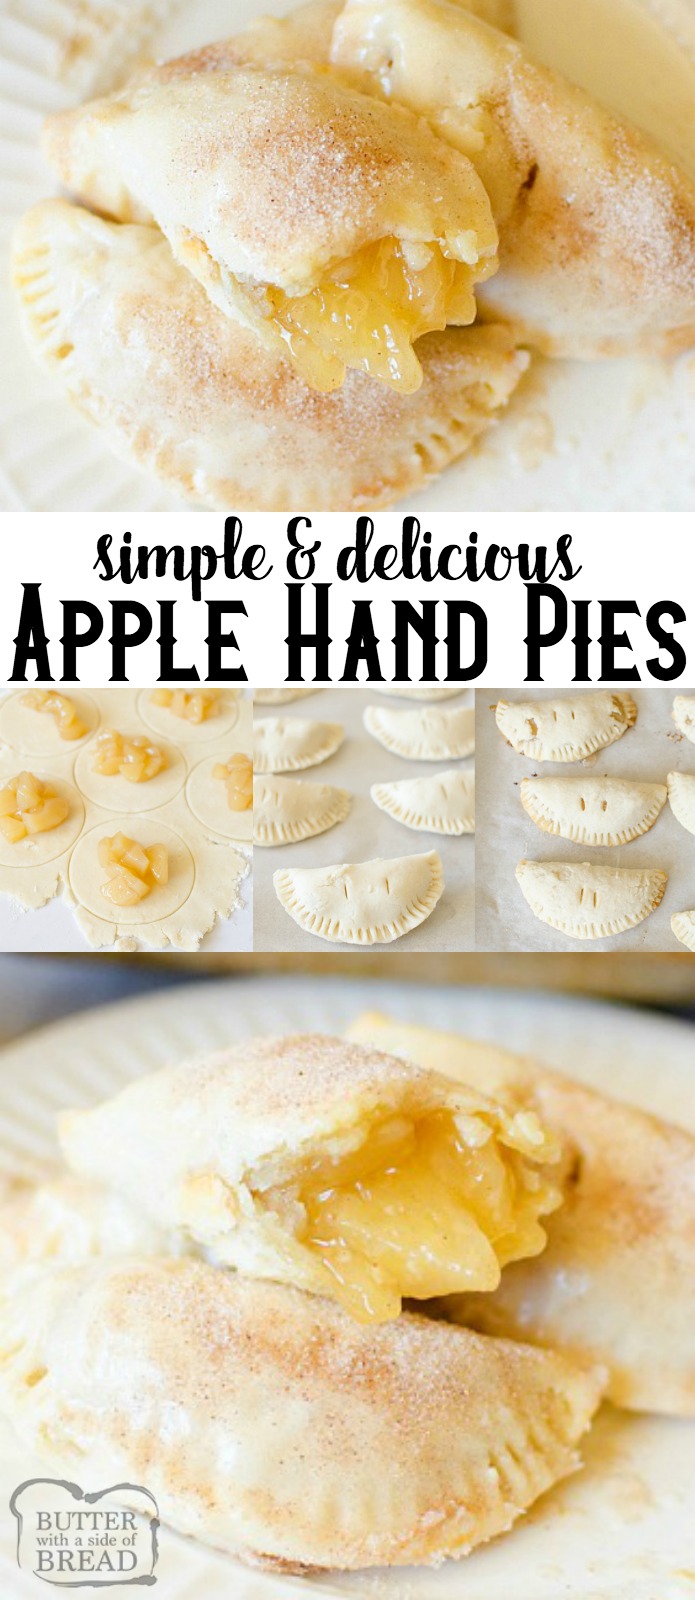 Apple Hand Pies are mini apple pies, no utensils needed! All the flakey crust and cinnamon apples wrapped up in a vanilla glaze held right in the palm of your hand. This will be the easiest, tastiest Hand Pie recipe you'll find! #apple #pies #dessert #applepie #handpie #recipe #foodie #simplerecipe #delicious #baking from BUTTER WITH A SIDE OF BREAD